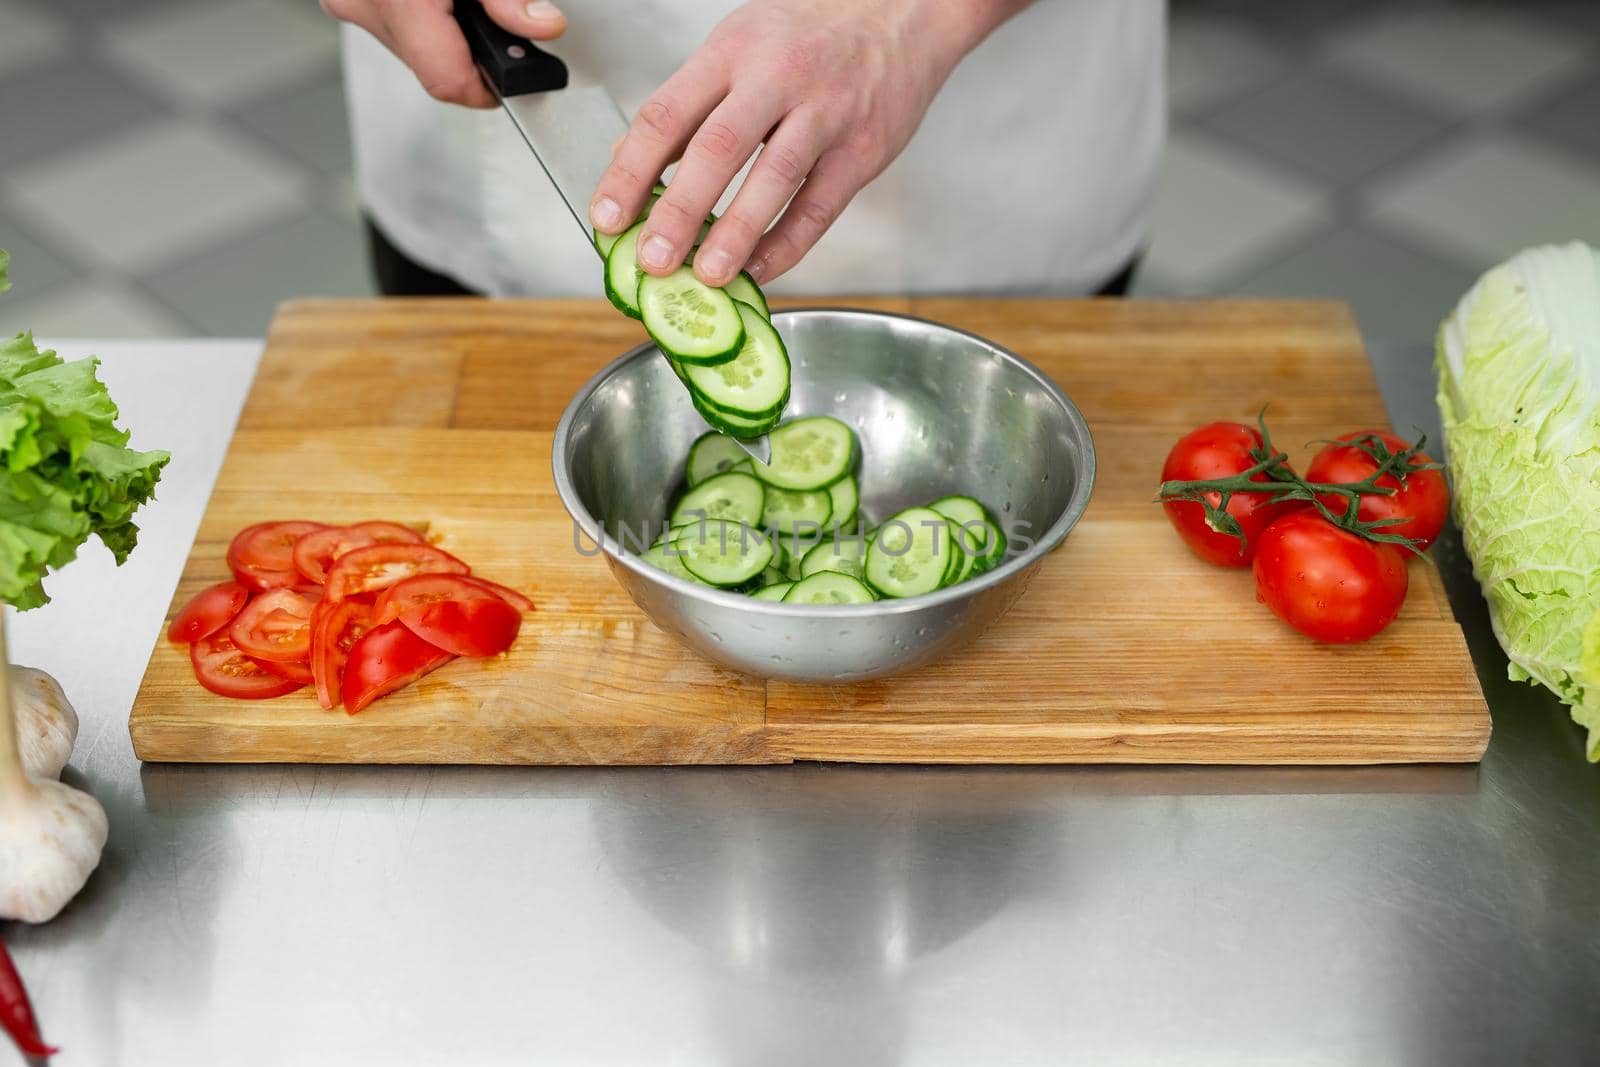 Chef in the kitchen cuts fresh and delicious vegetables for a vegetable salad. by StudioPeace